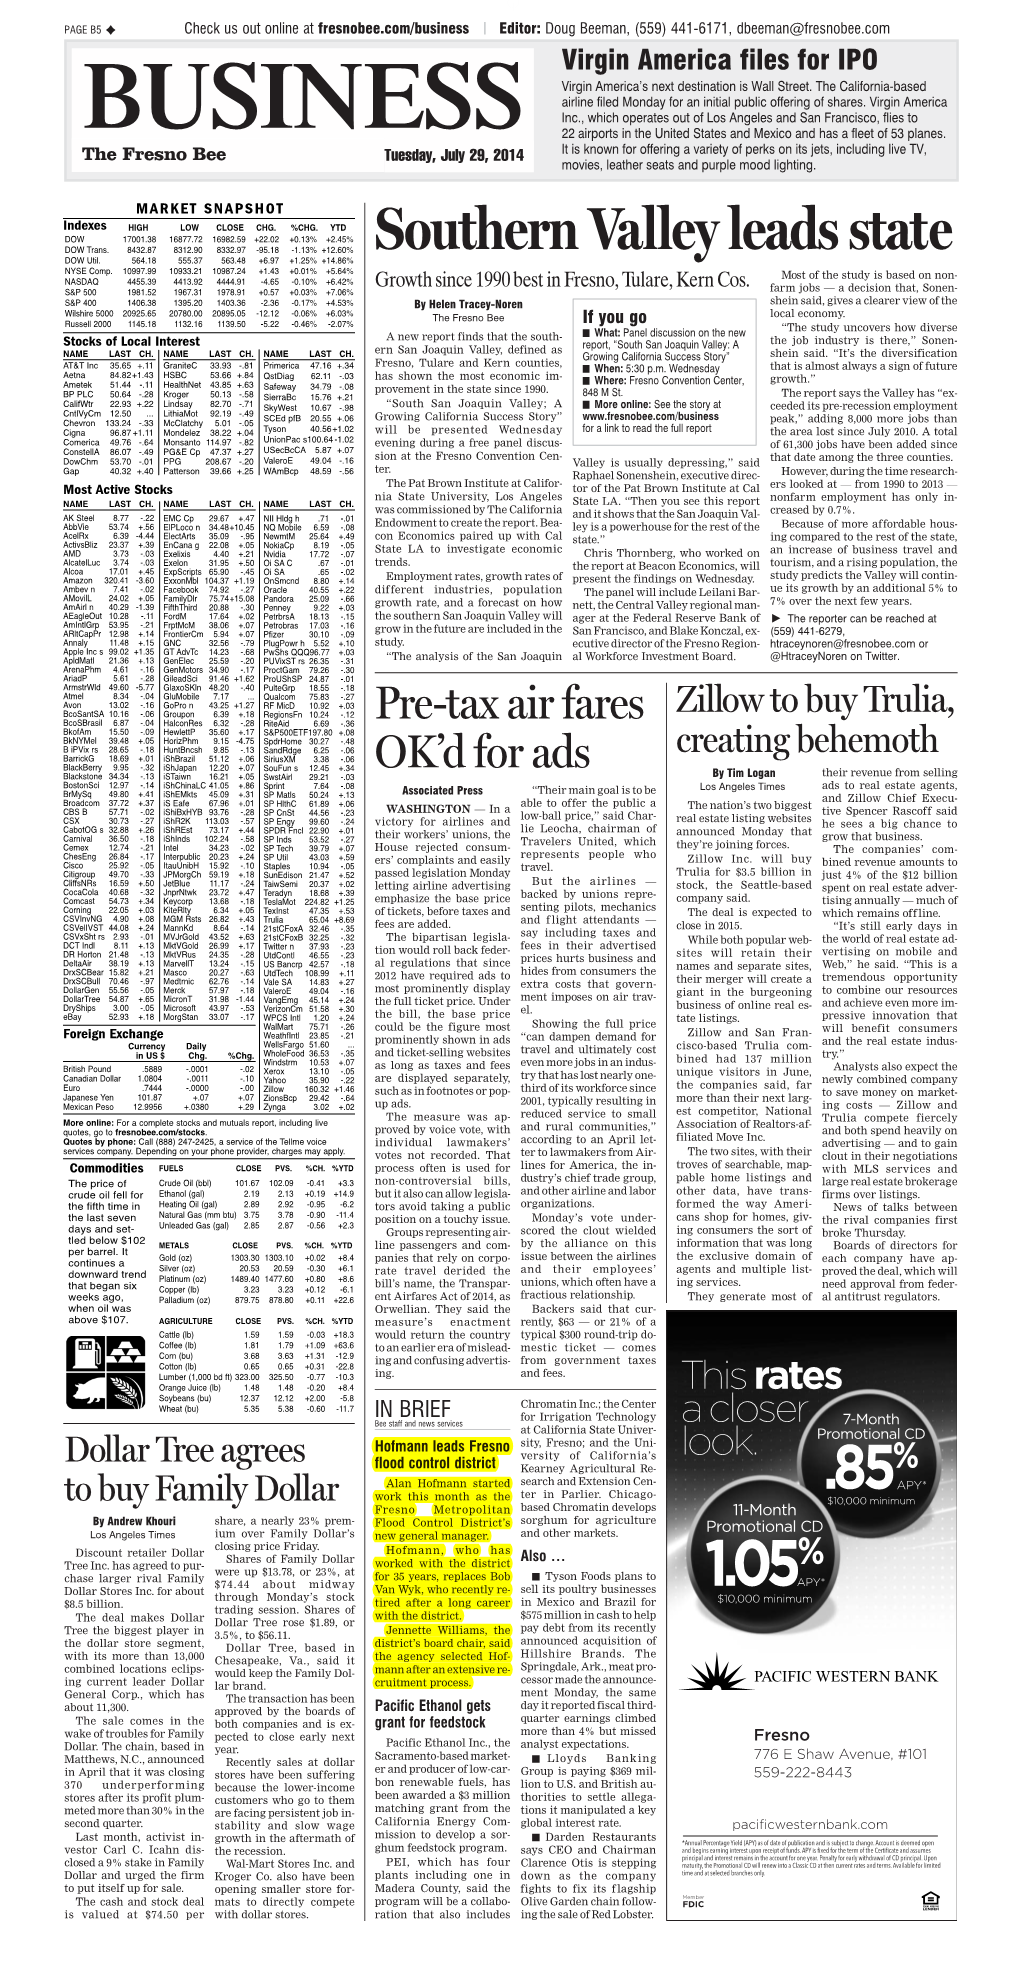 The Fresno Bee Tuesday, July 29, 2014 It Is Known for Offering a Variety of Perks on Its Jets, Including Live TV, Movies, Leather Seats and Purple Mood Lighting